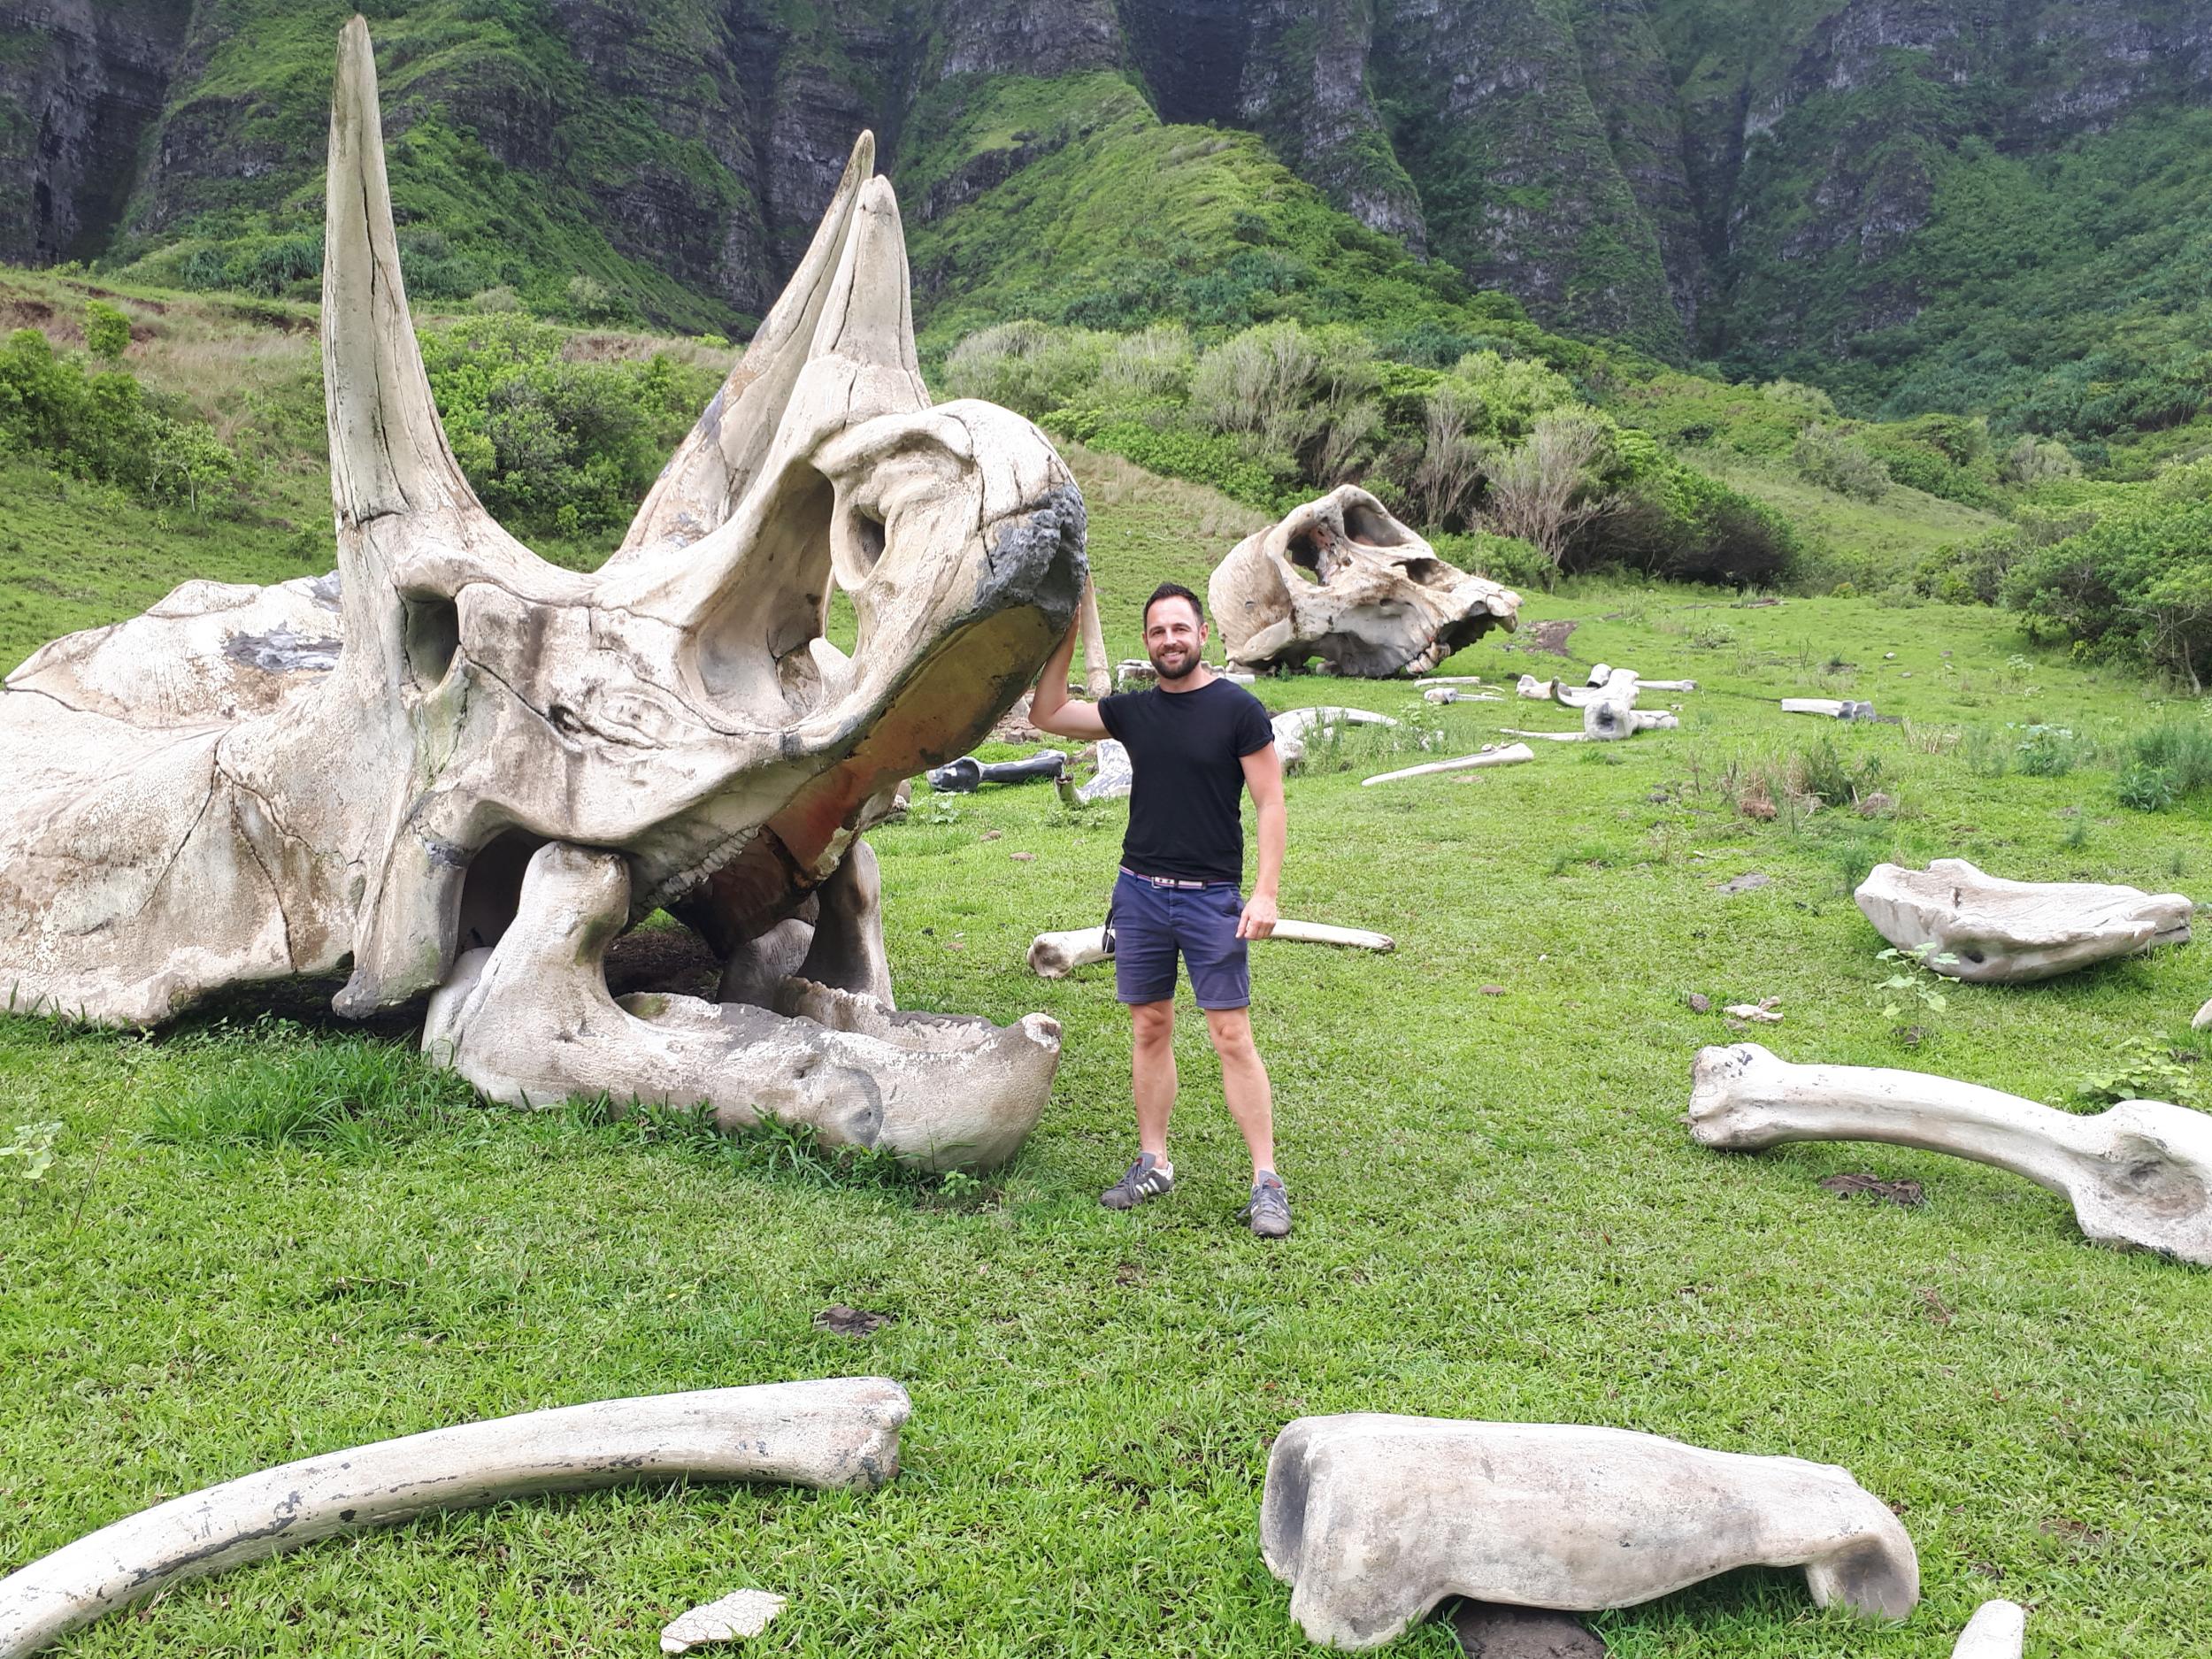 Dem bones: James gets his hands on a relic from ‘Kong: Skull Island’